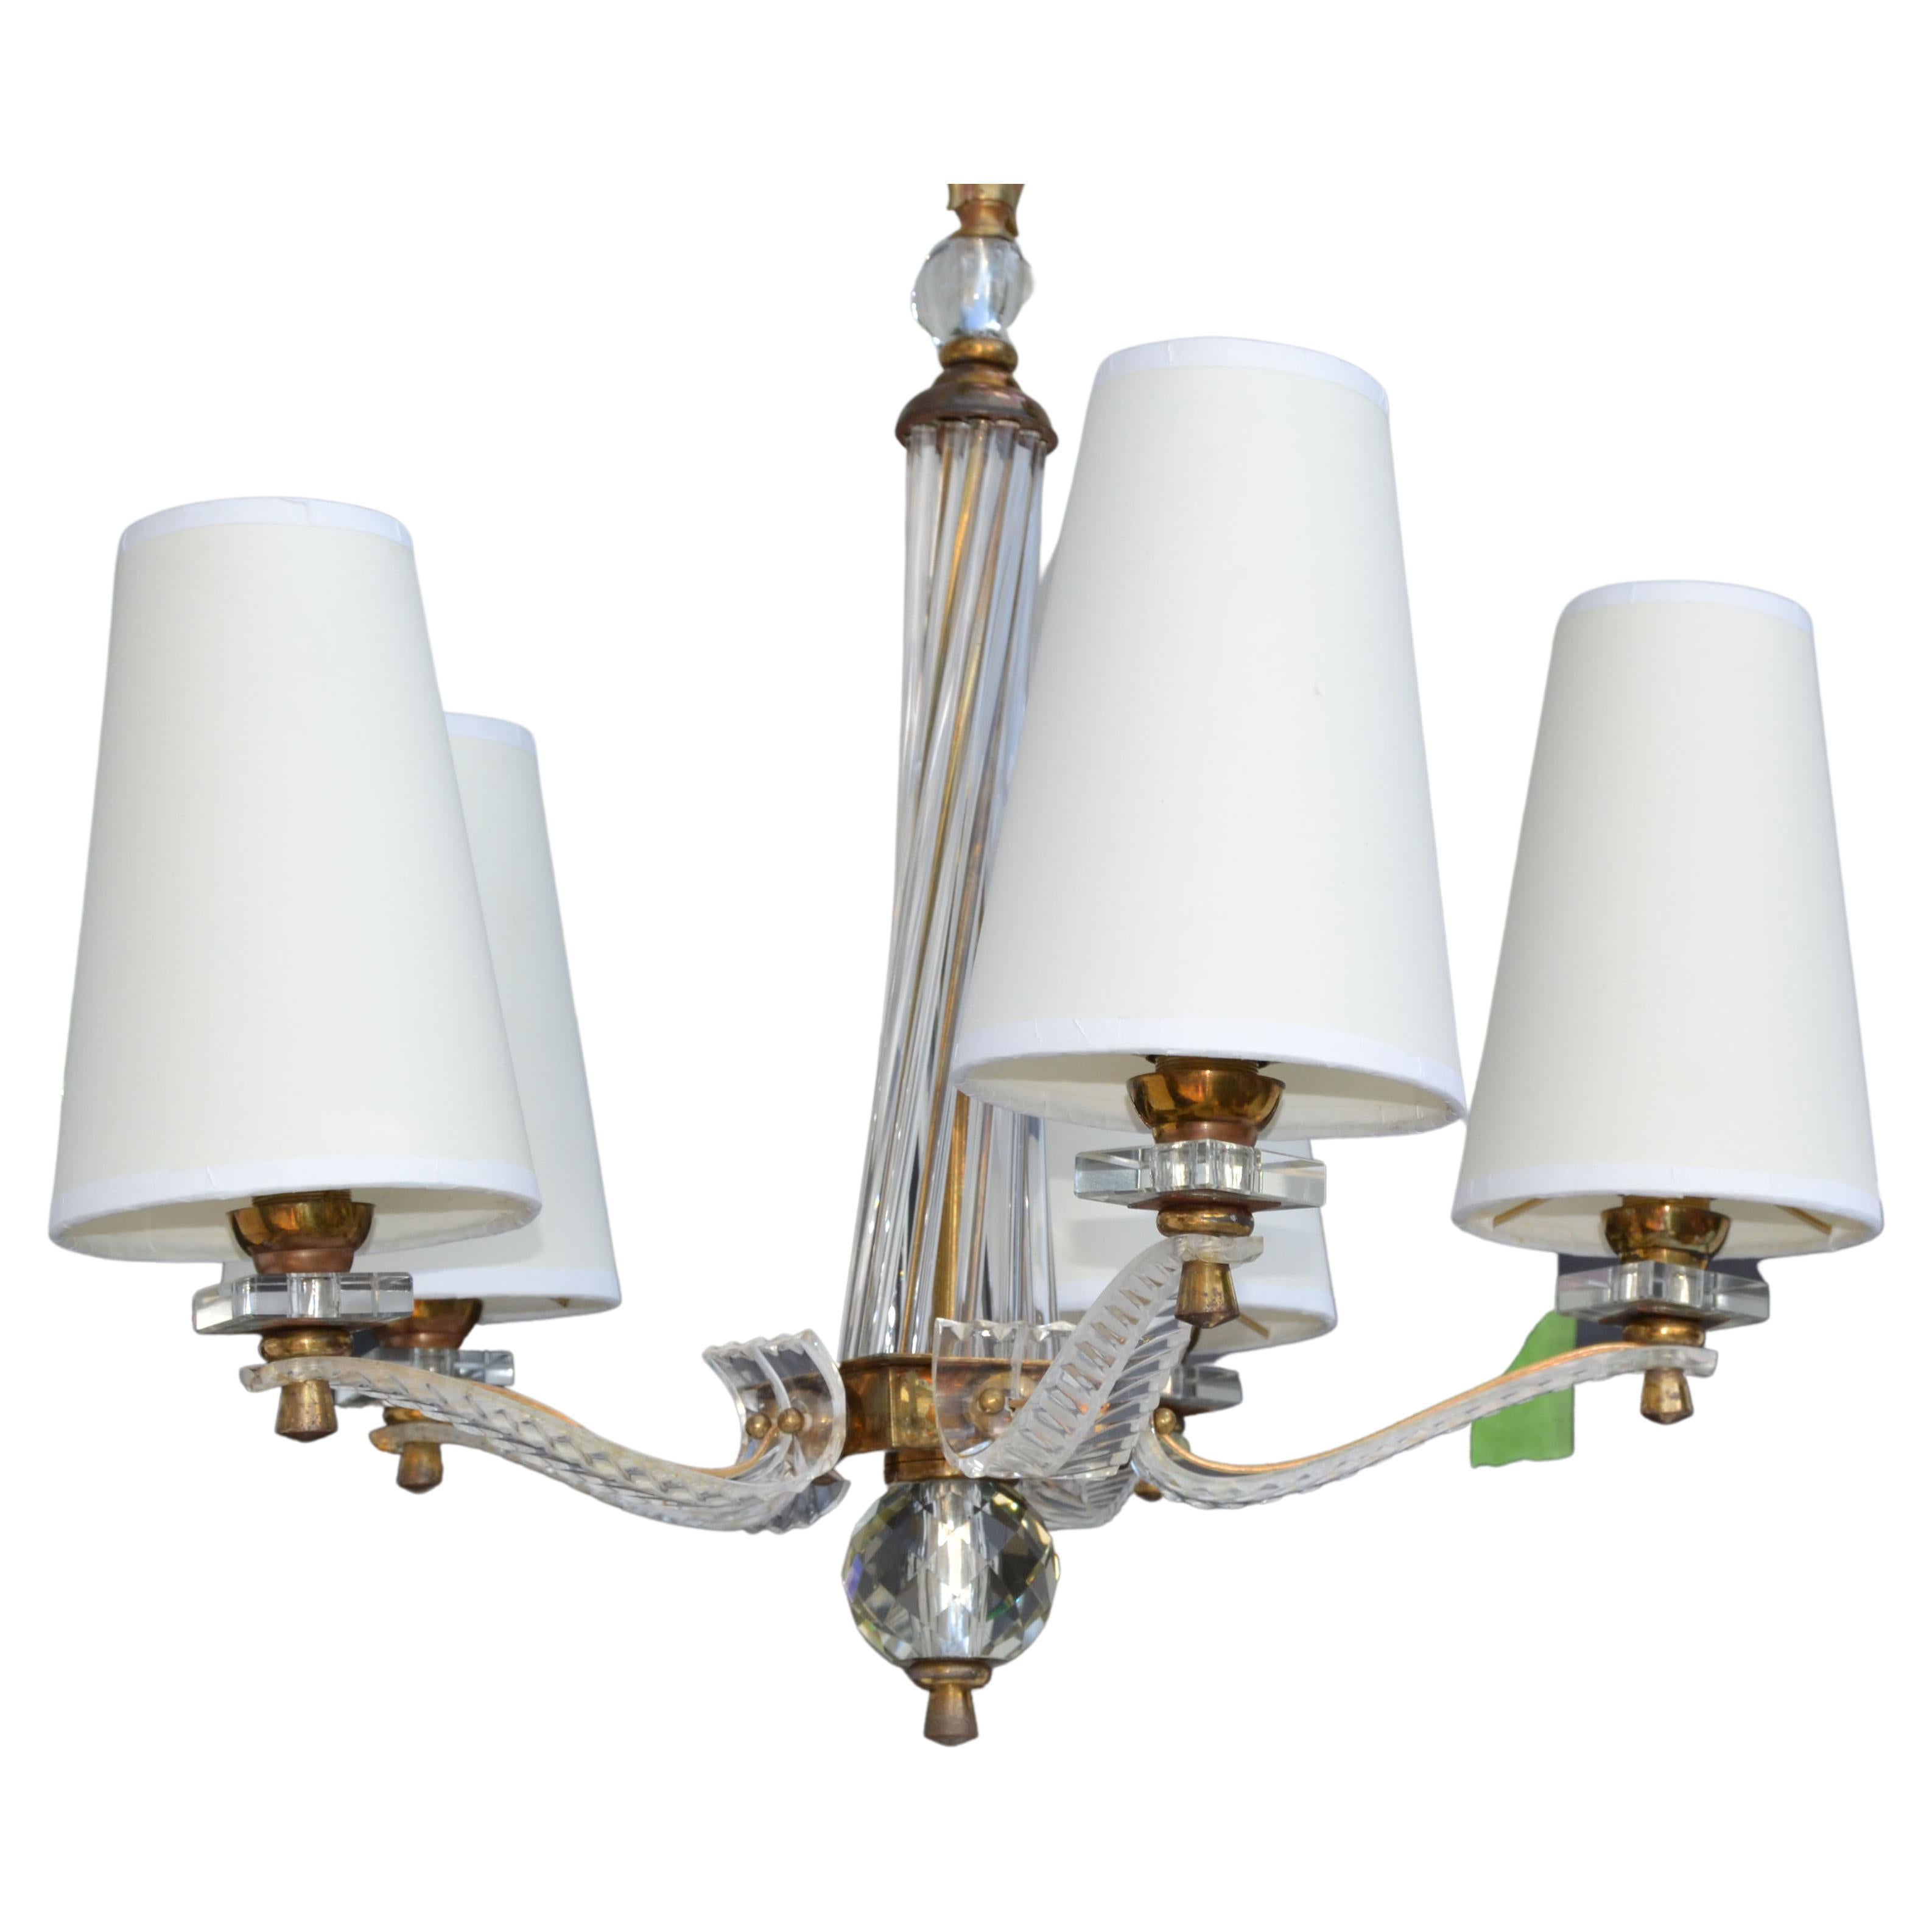 5 Light chandelier of brass, Lucite and blown glass rods designed by Maison Jansen. 
The cone off-white shades are included.
Working condition and takes 5 max. 60 watts light bulb.
Cone Shade measure:
Top diameter: 3, bottom diameter 5 inches,